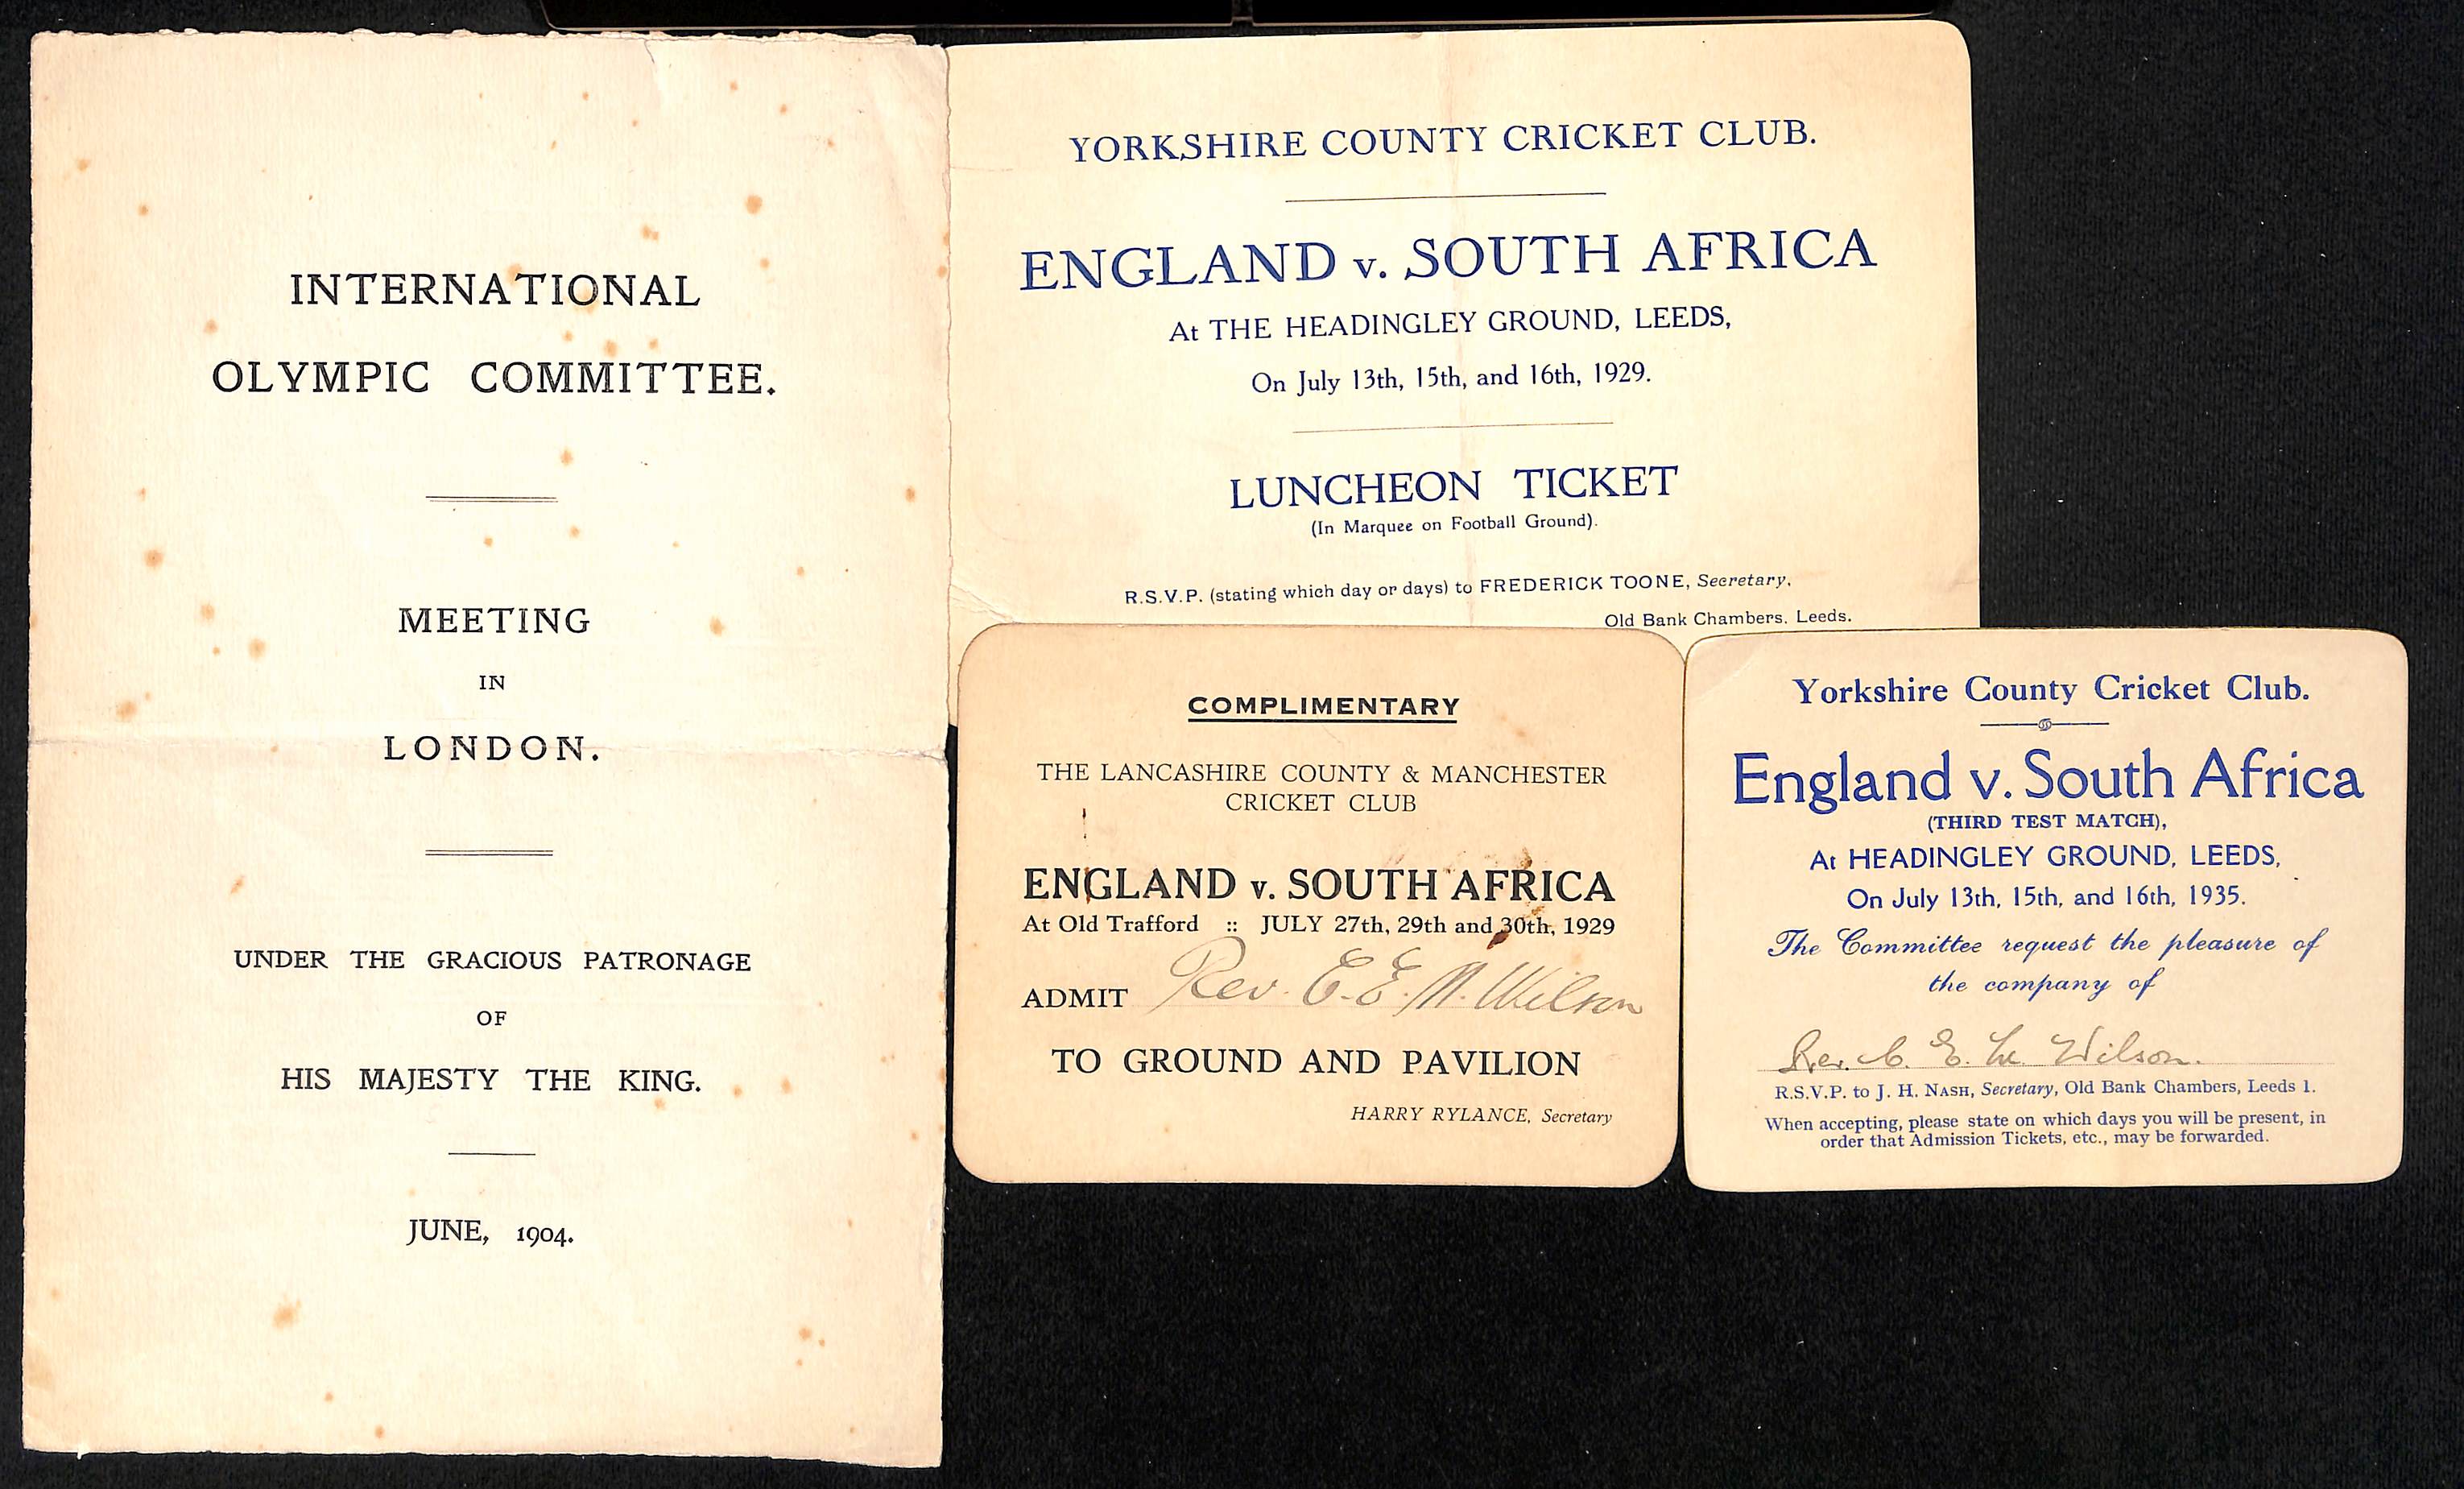 South Africa - Tours to England. 1904-2003 Ephemera including scarce 1904 programme of the